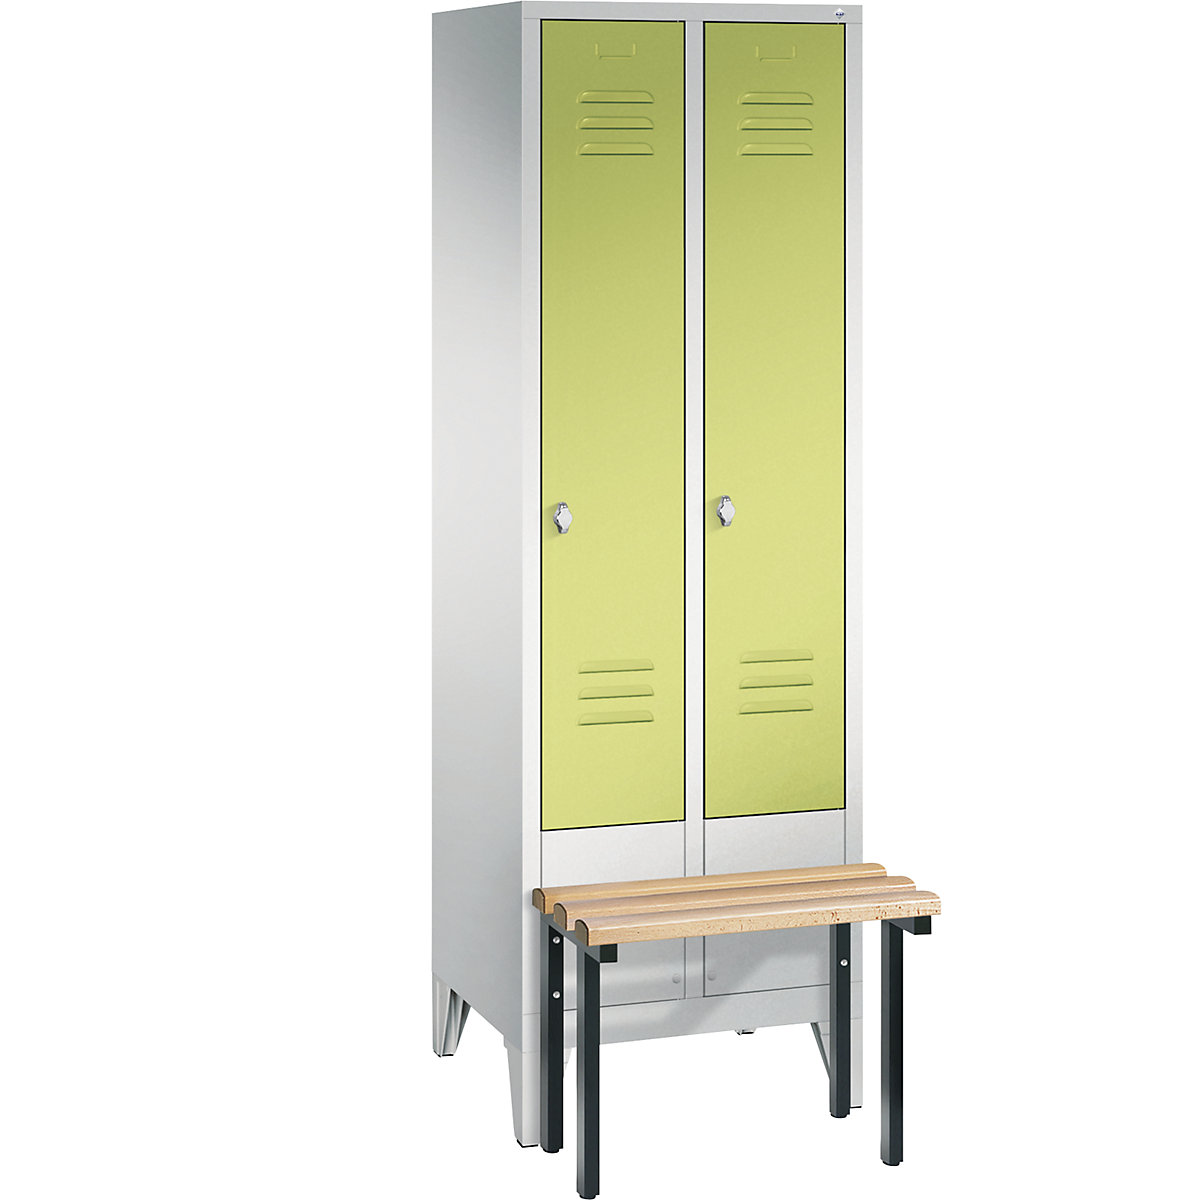 CLASSIC cloakroom locker with bench mounted in front – C+P, 2 compartments, compartment width 300 mm, light grey / viridian green-13